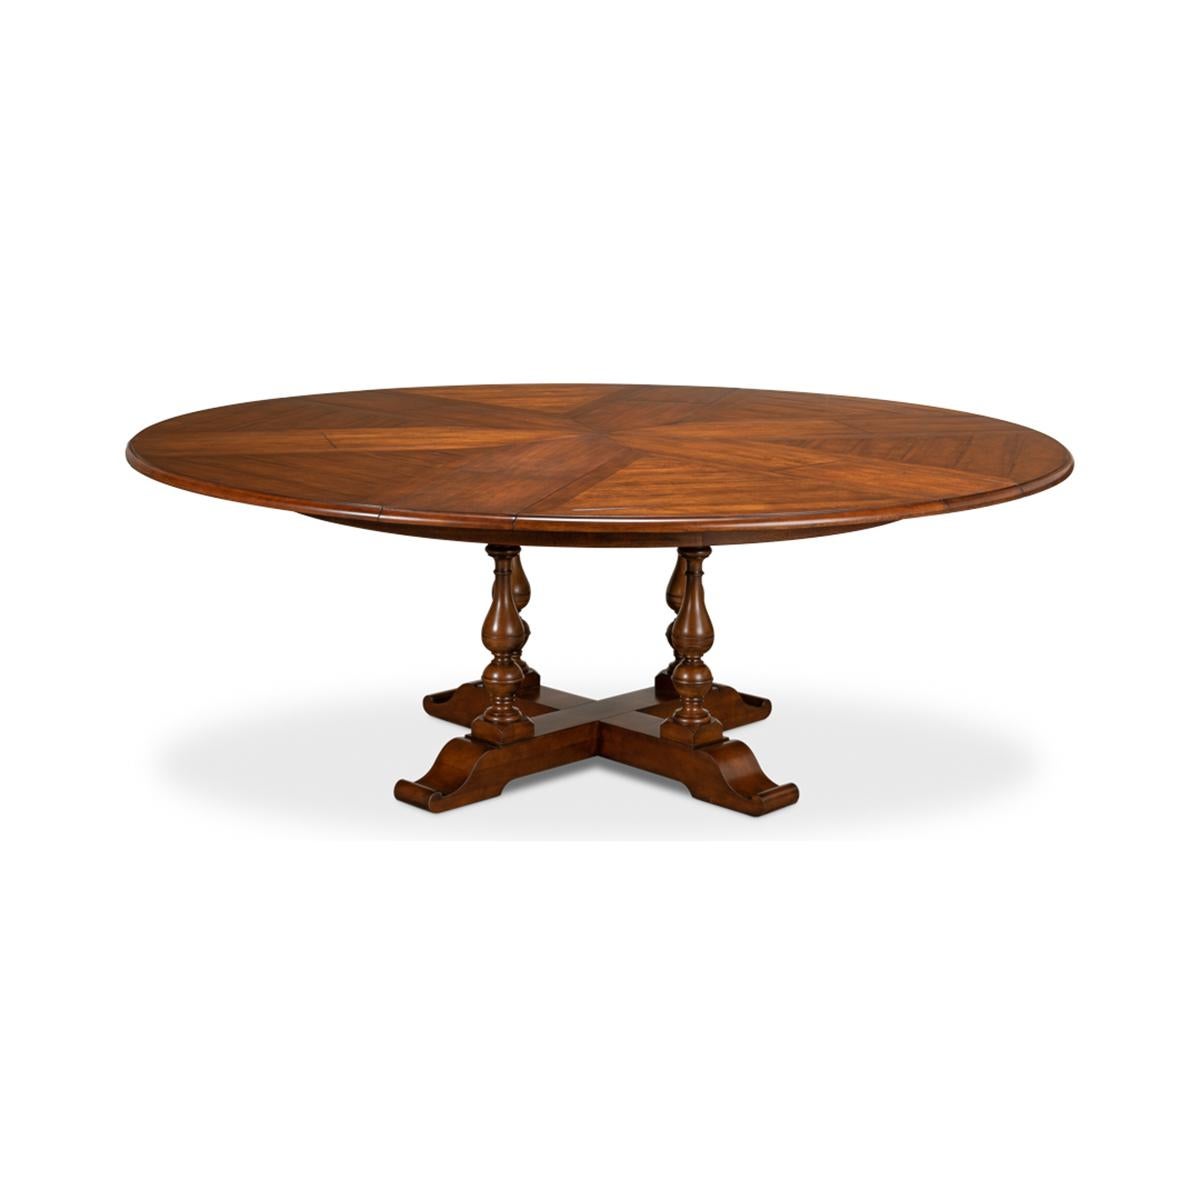 Elizabethan Early English Style Round Extension Dining Table - 84